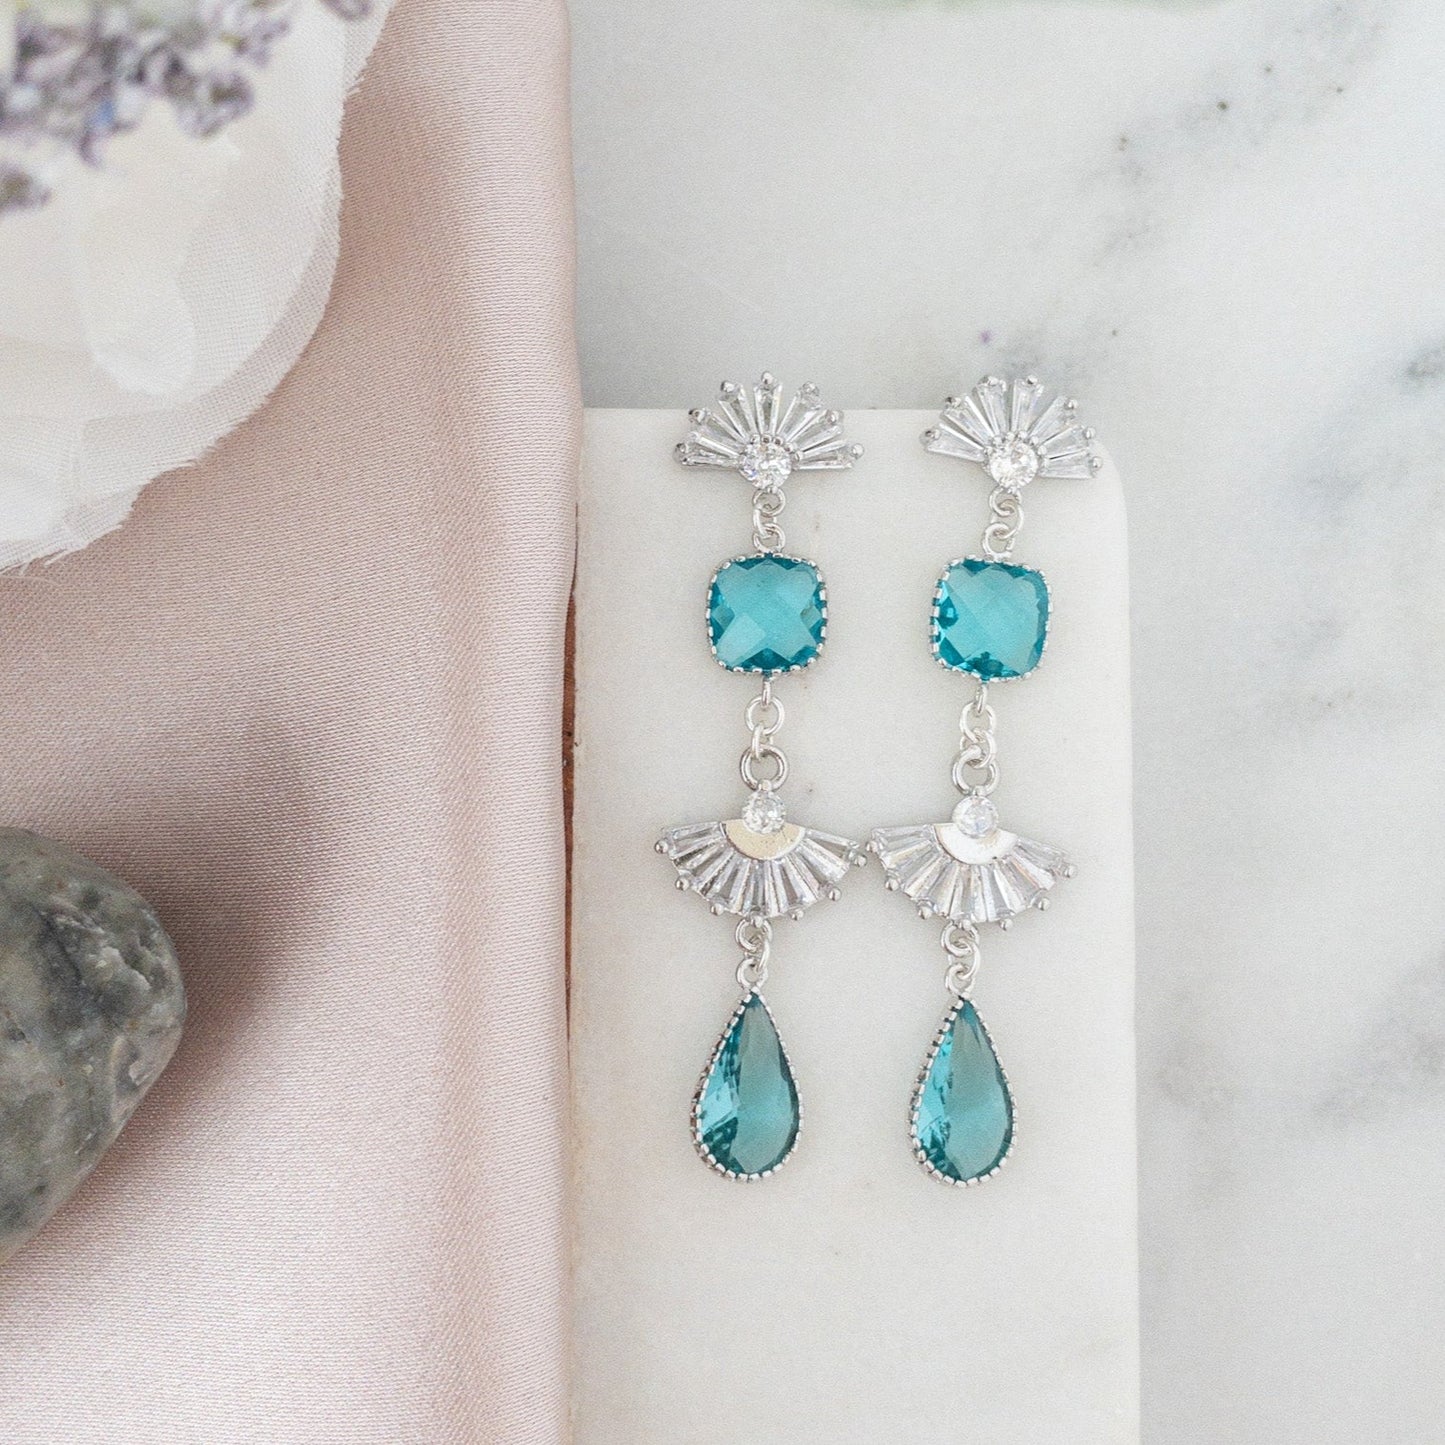 The Evelyn Earrings - Silver/Teal Stones